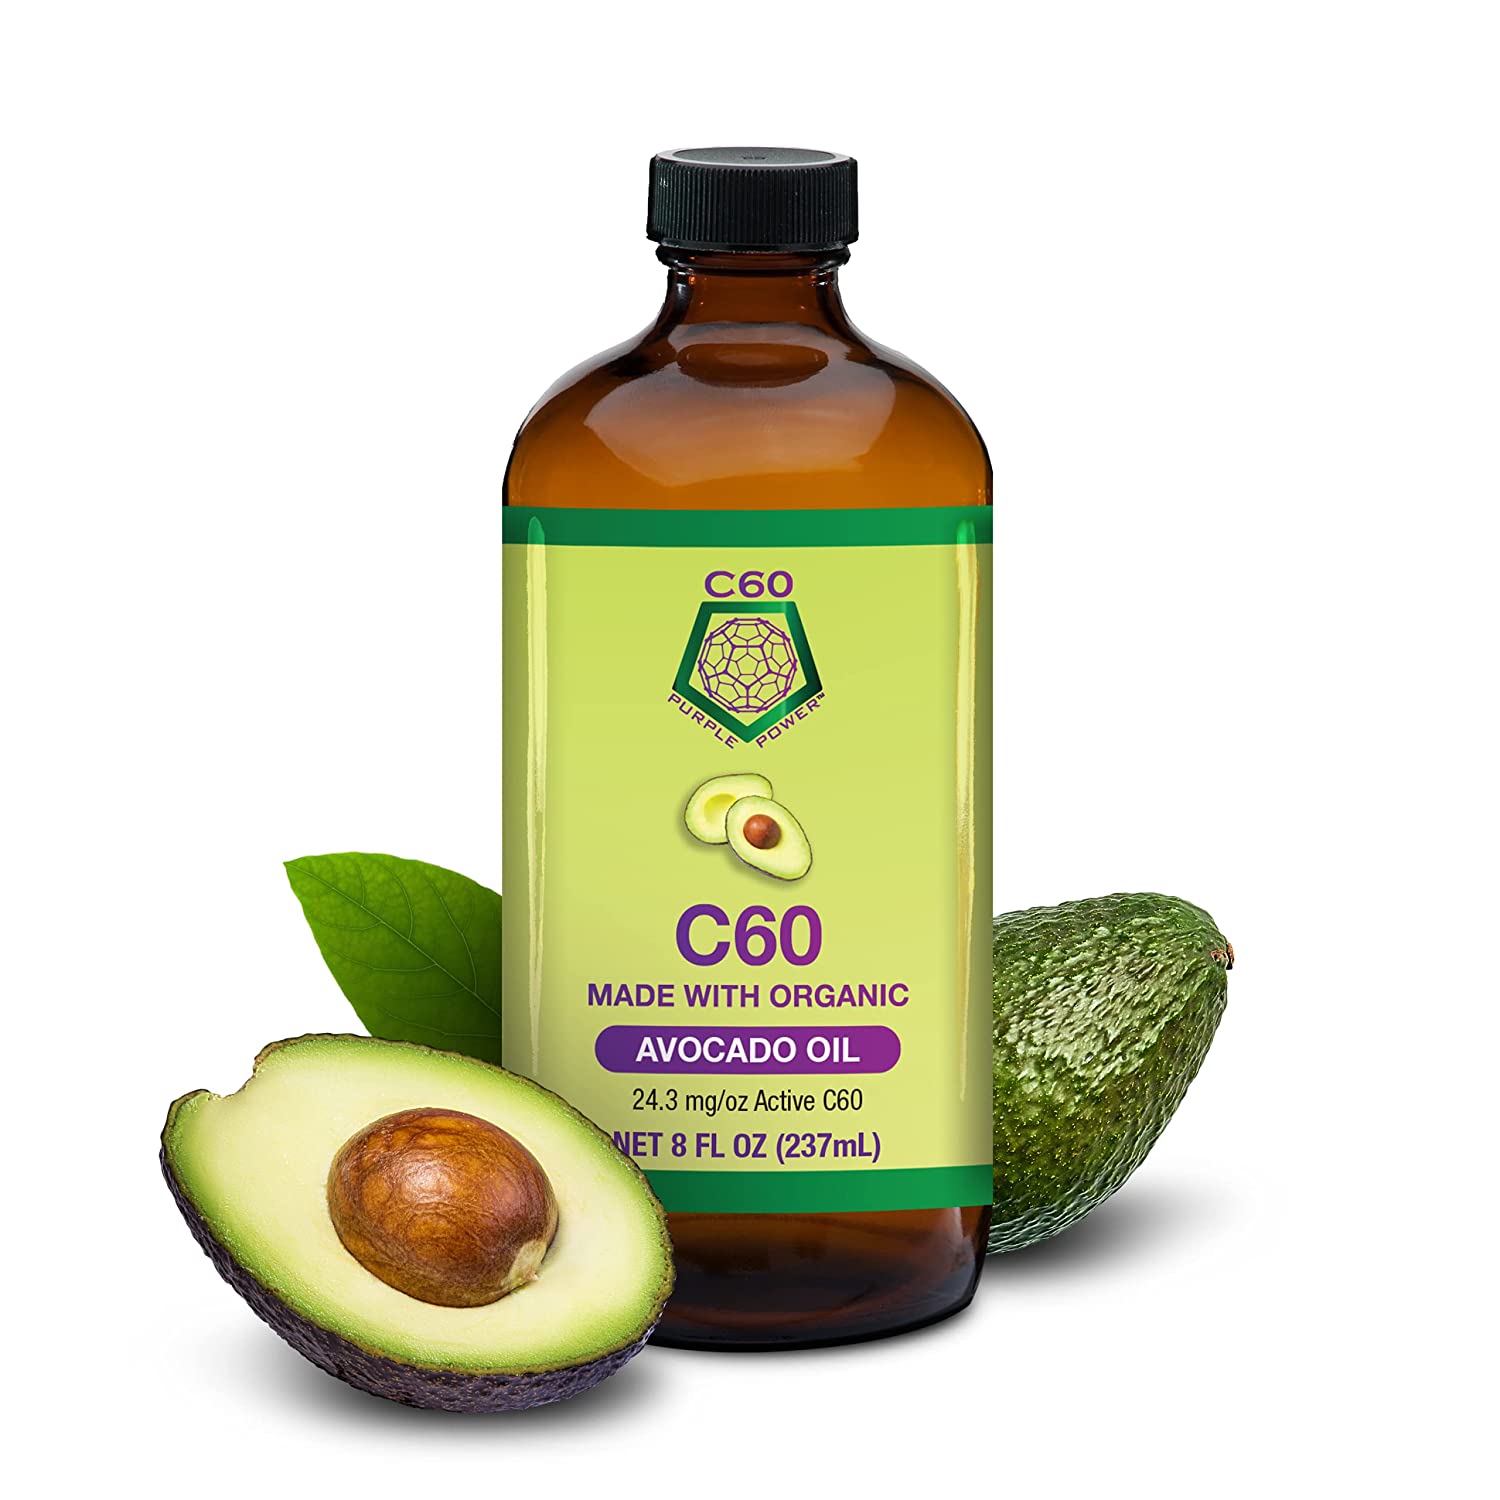 What health benefits does C60 oil have?